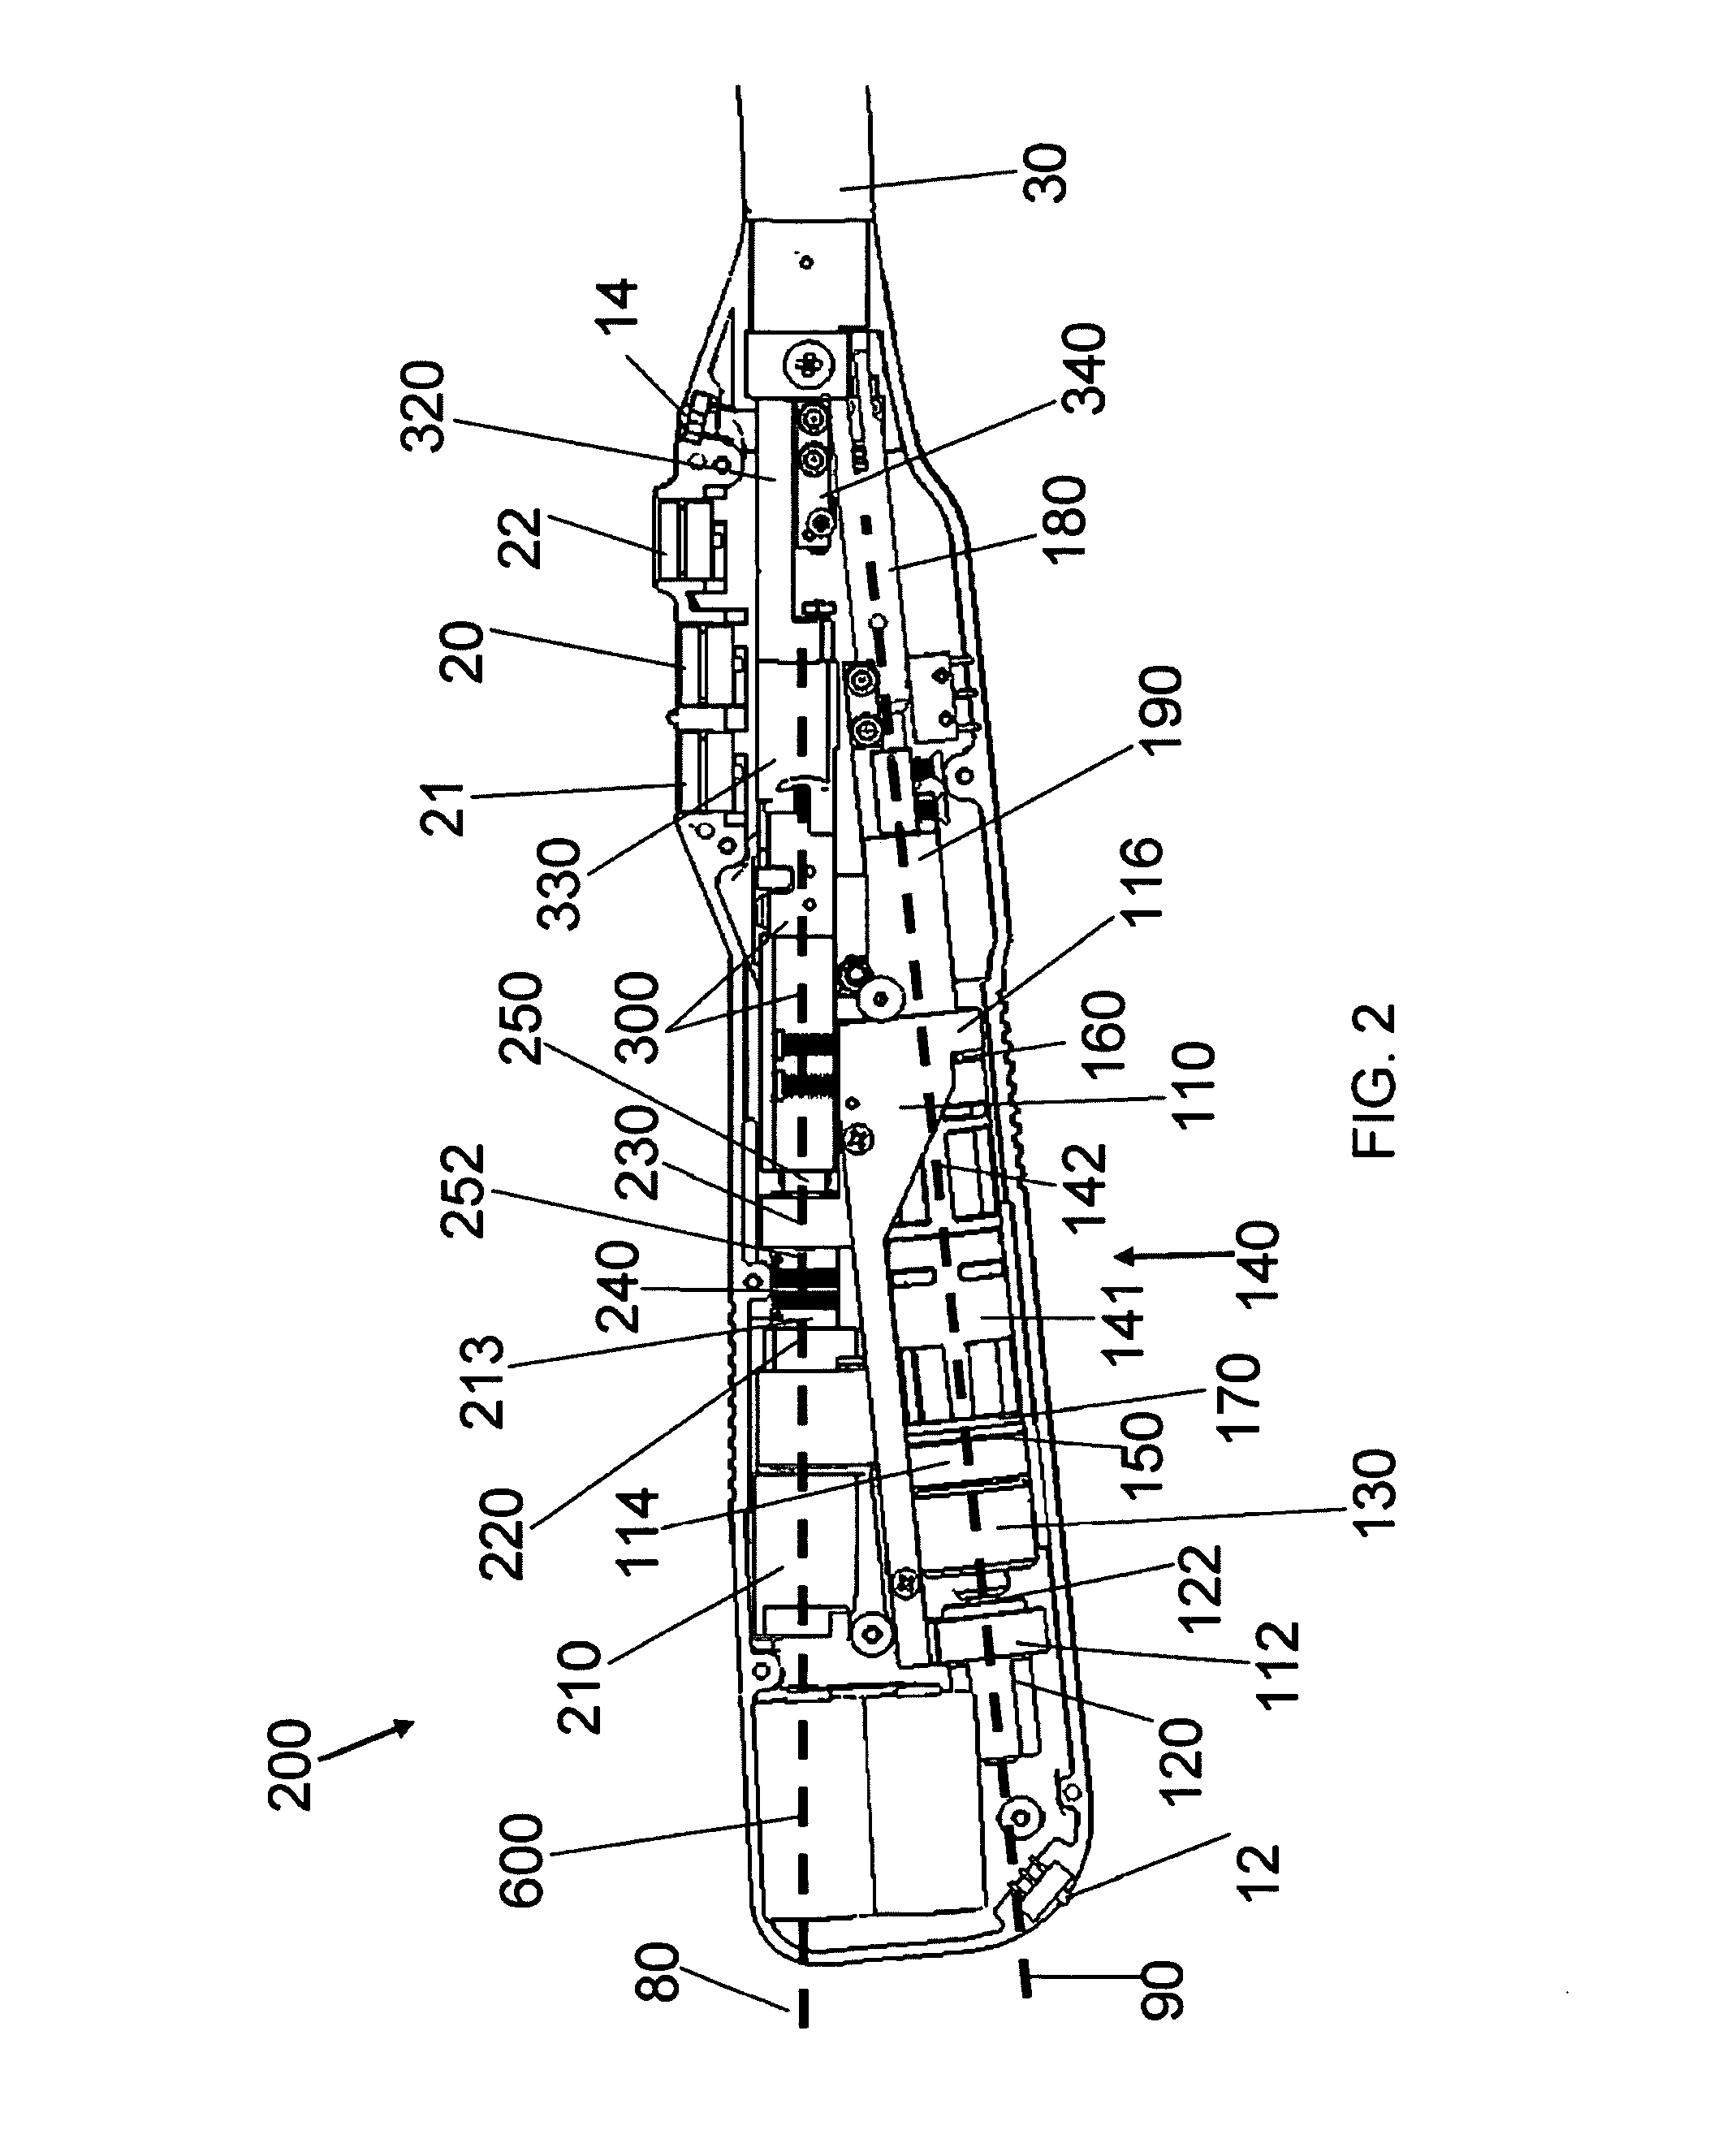 Method for Operating an Electrical Surgical Instrument with Optimal Tissue Compression